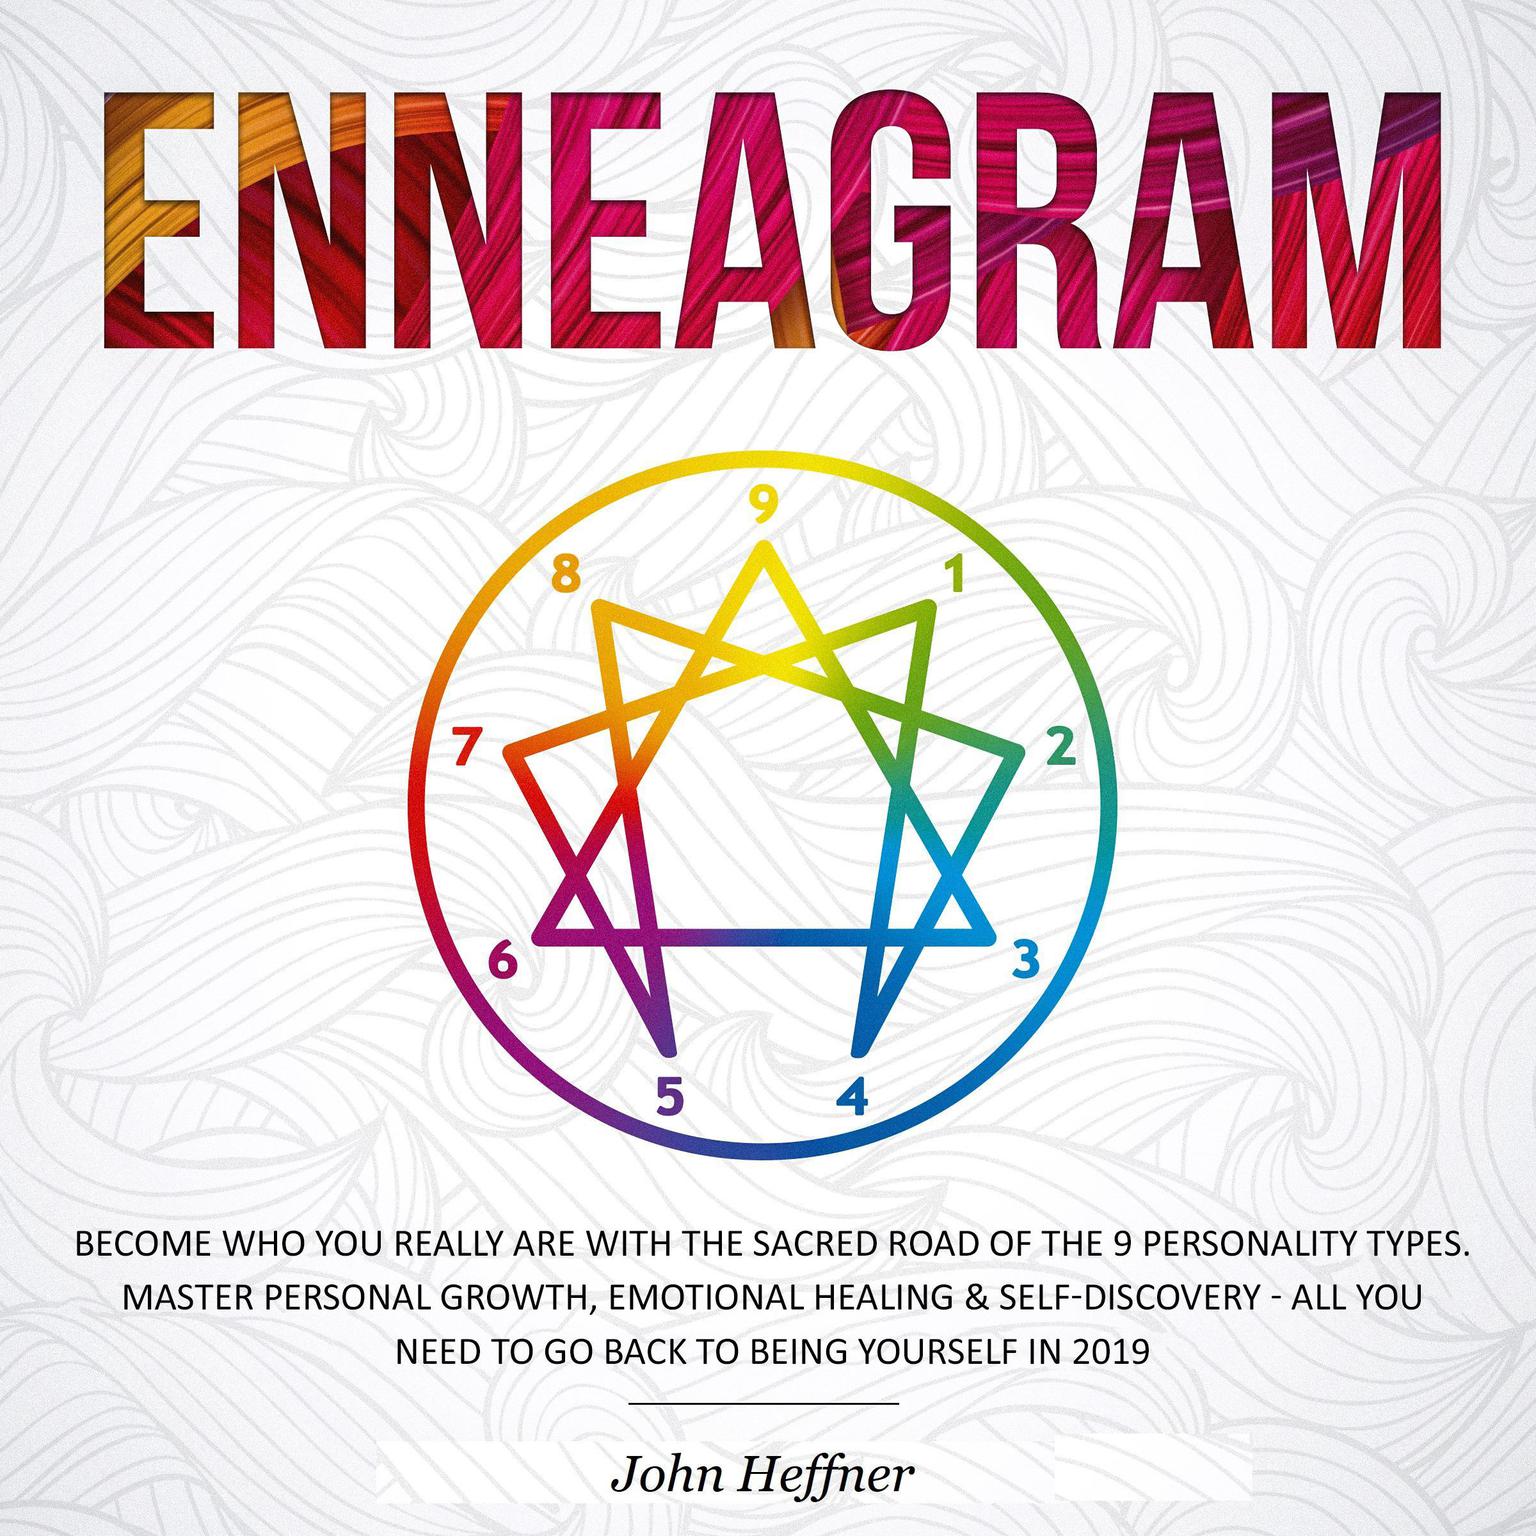 Enneagram: Become Who You Really Are with the Sacred Road of the 9 Personality Types. Master Personal Growth, Emotional Healing & Self-Discovery—All You Need to Go Back to Being Yourself in 2019 Audiobook, by John Heffner